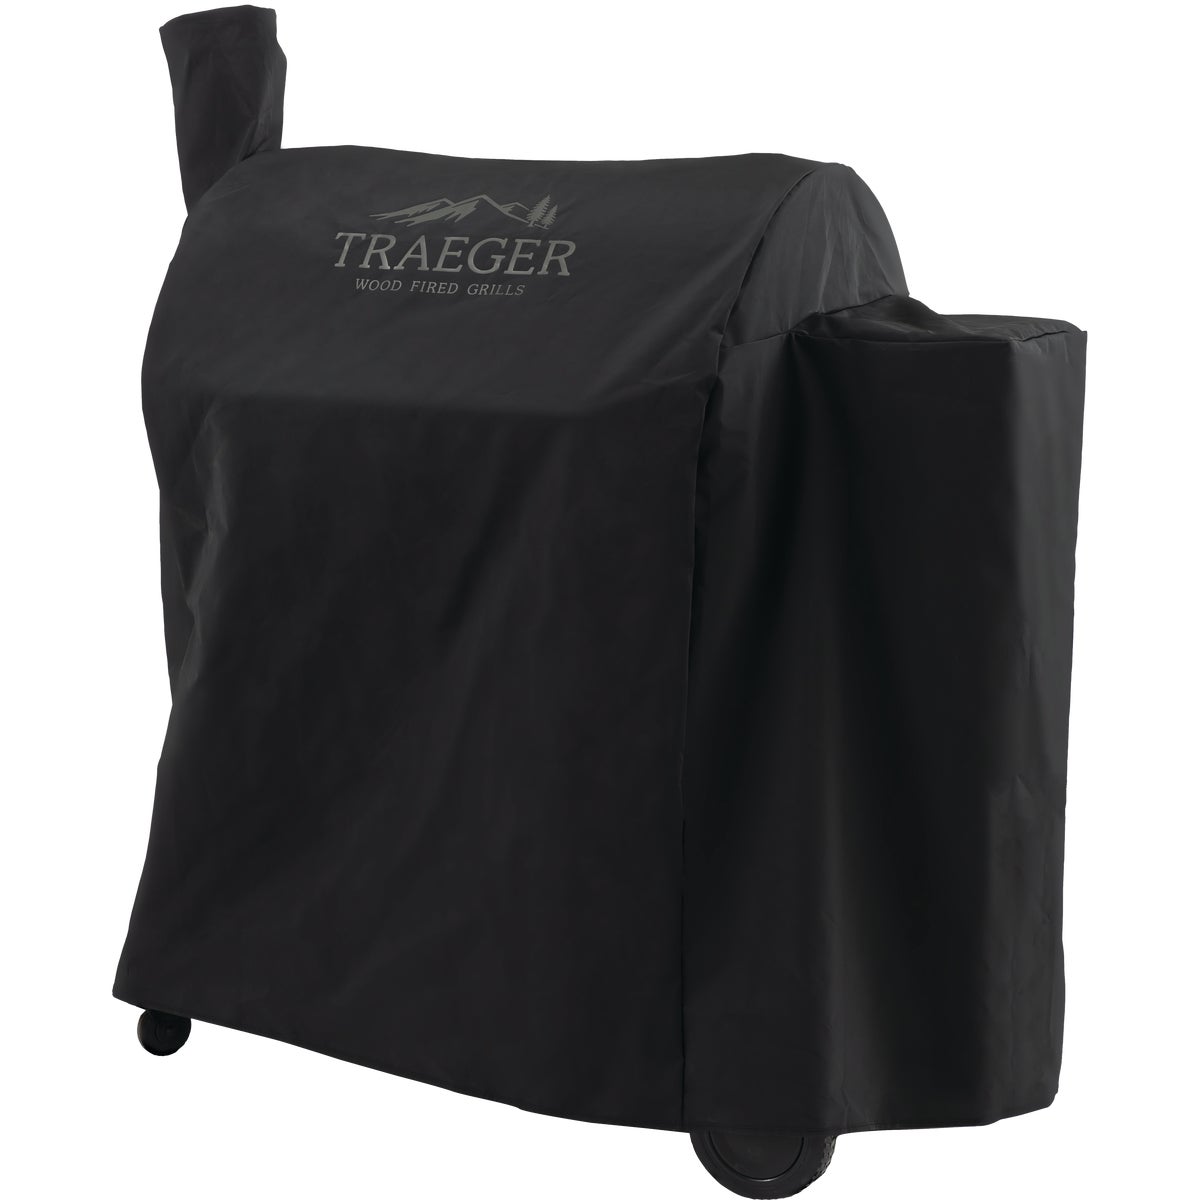 Item 841866, Pro 780 grill cover.